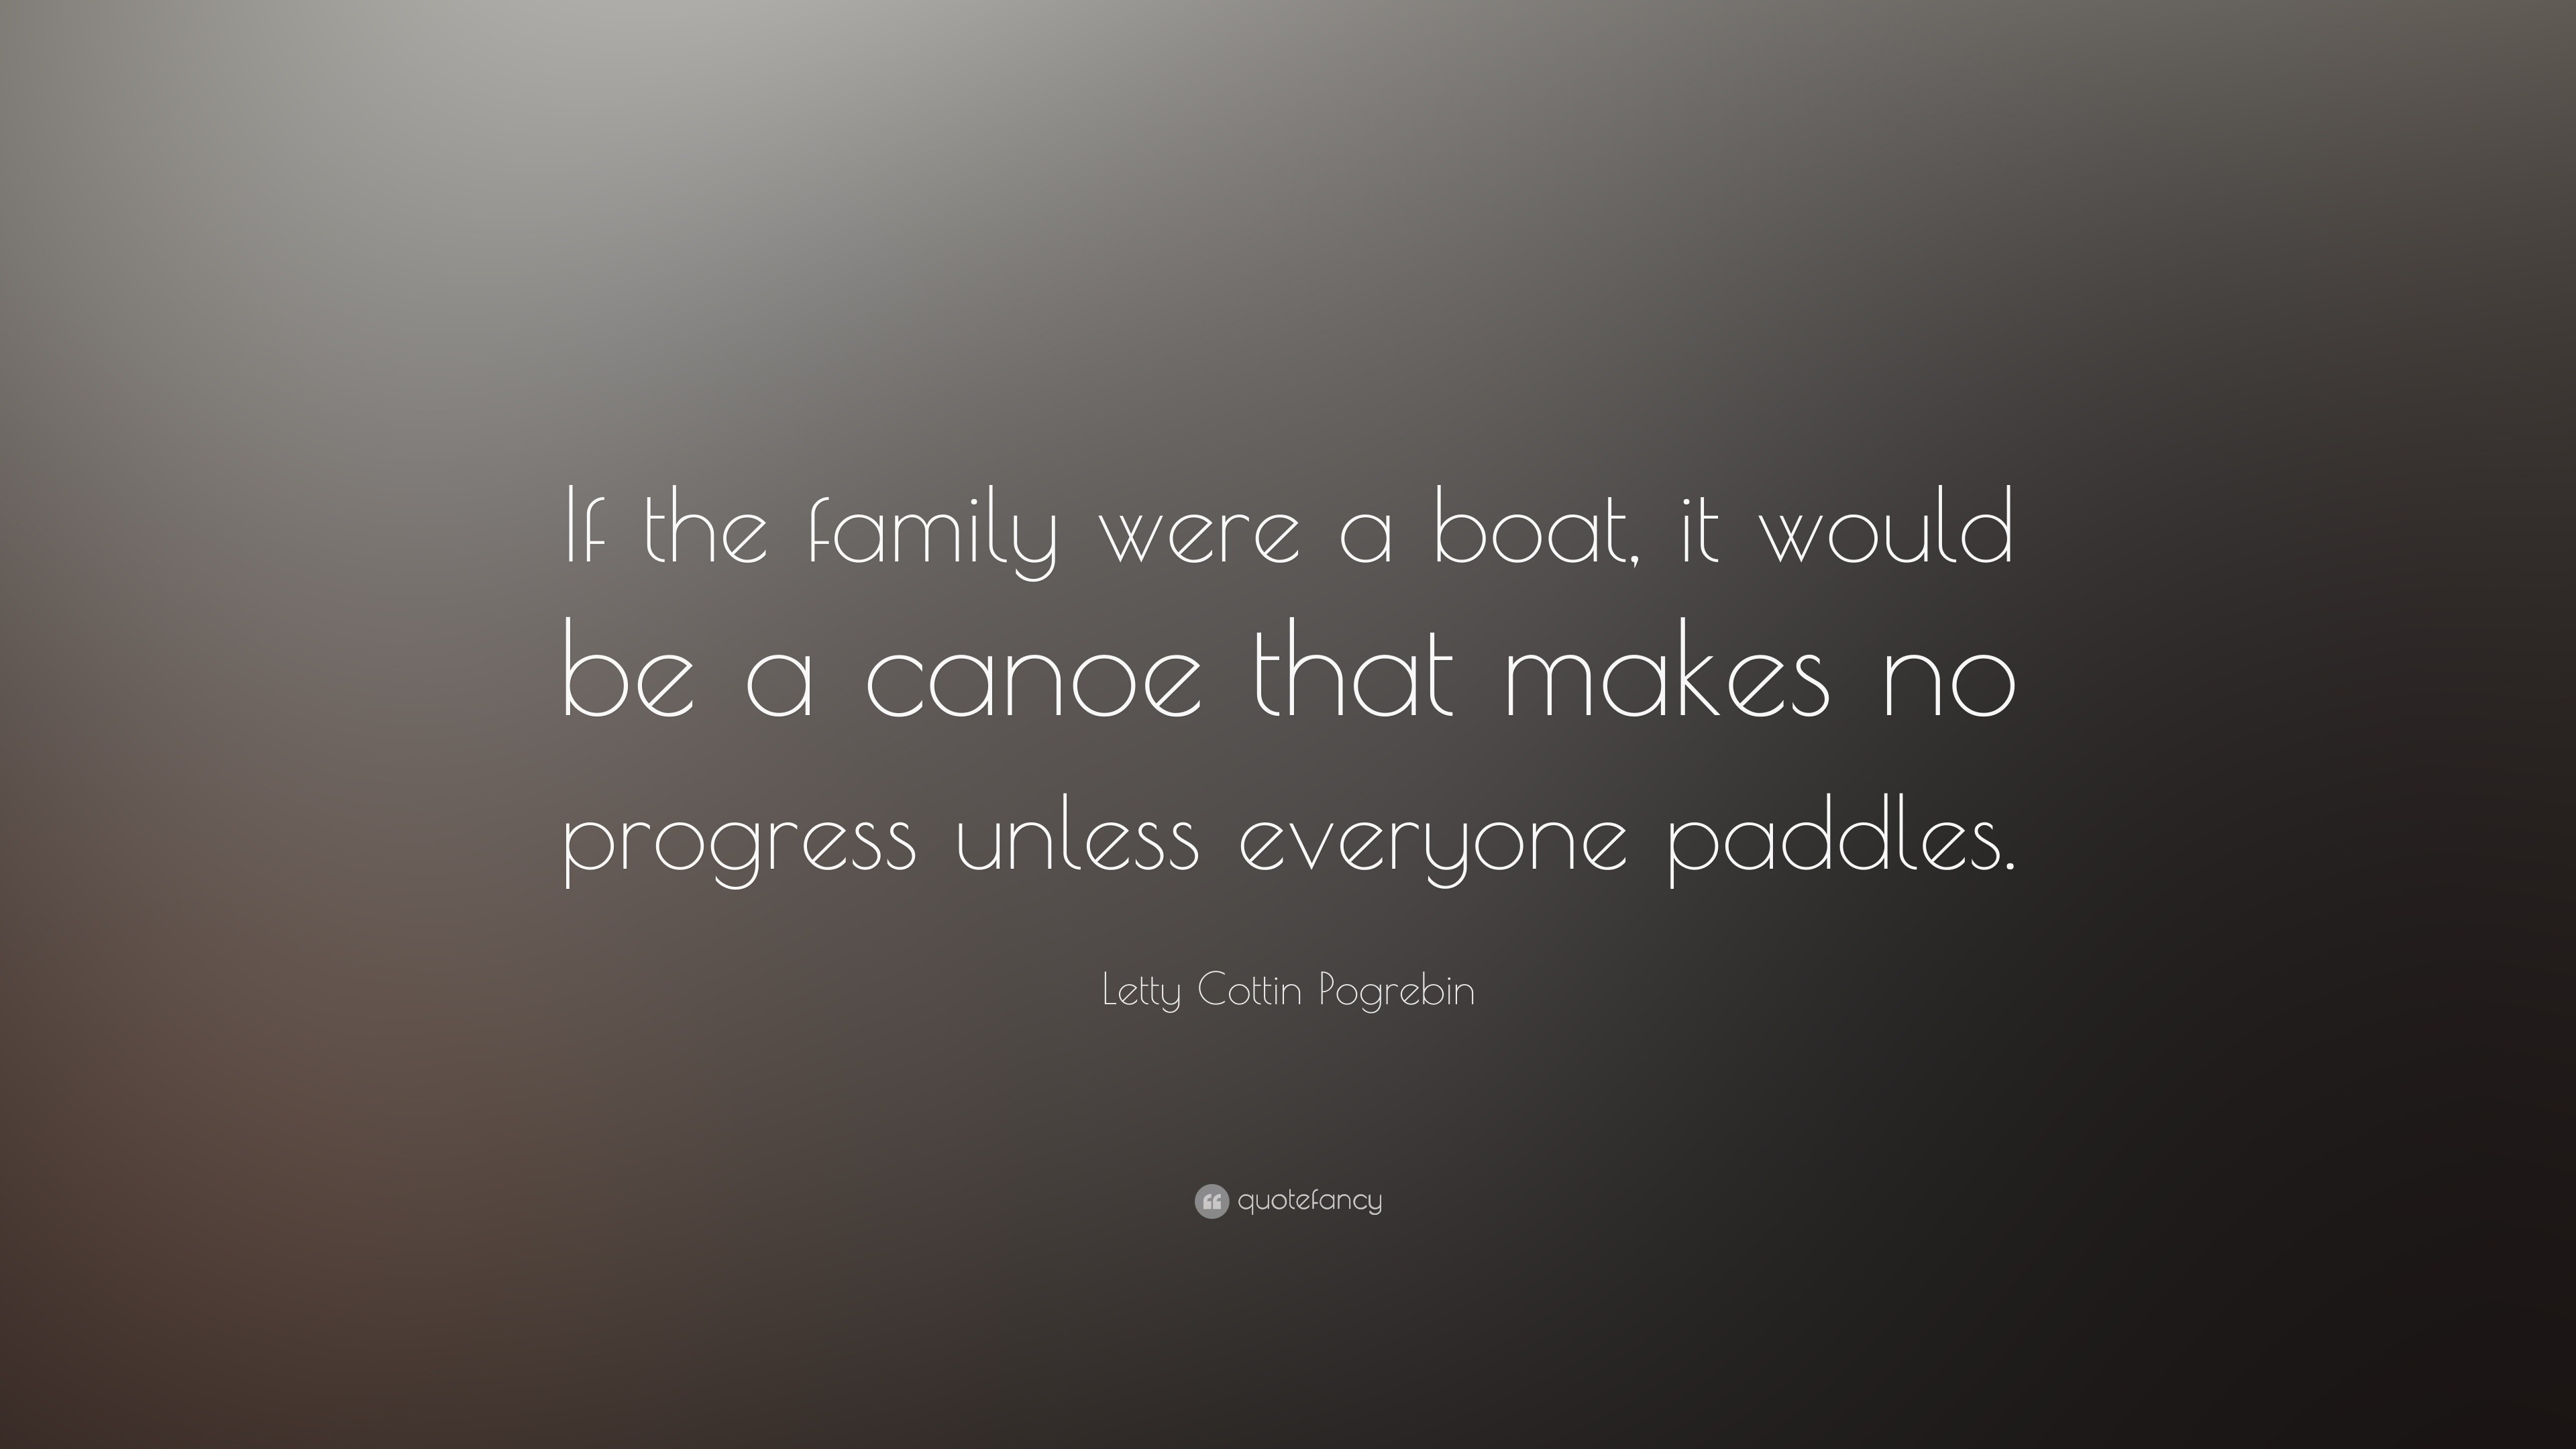 Letty Cottin Pogrebin Quote: “If the family were a boat, it would be a ...